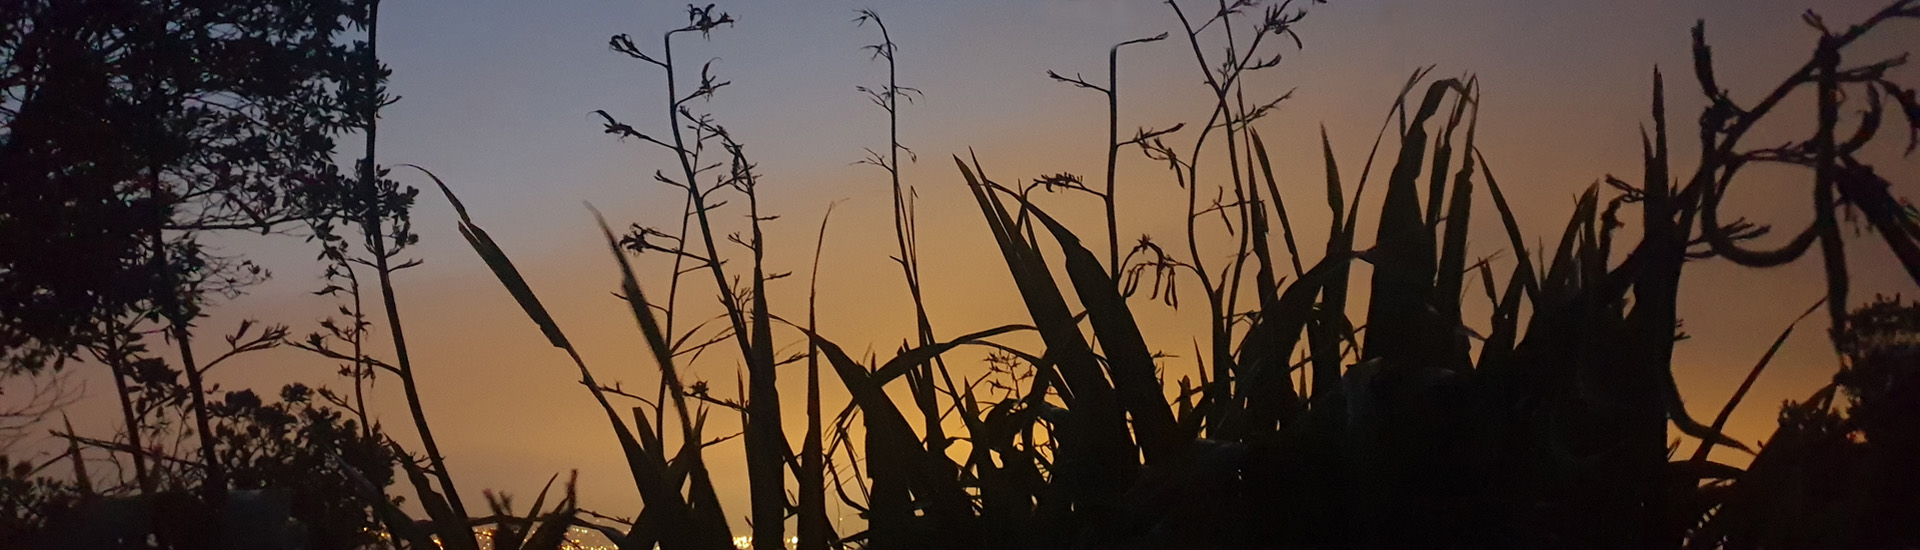 Sunset behind silhouette of harakeke flax plants